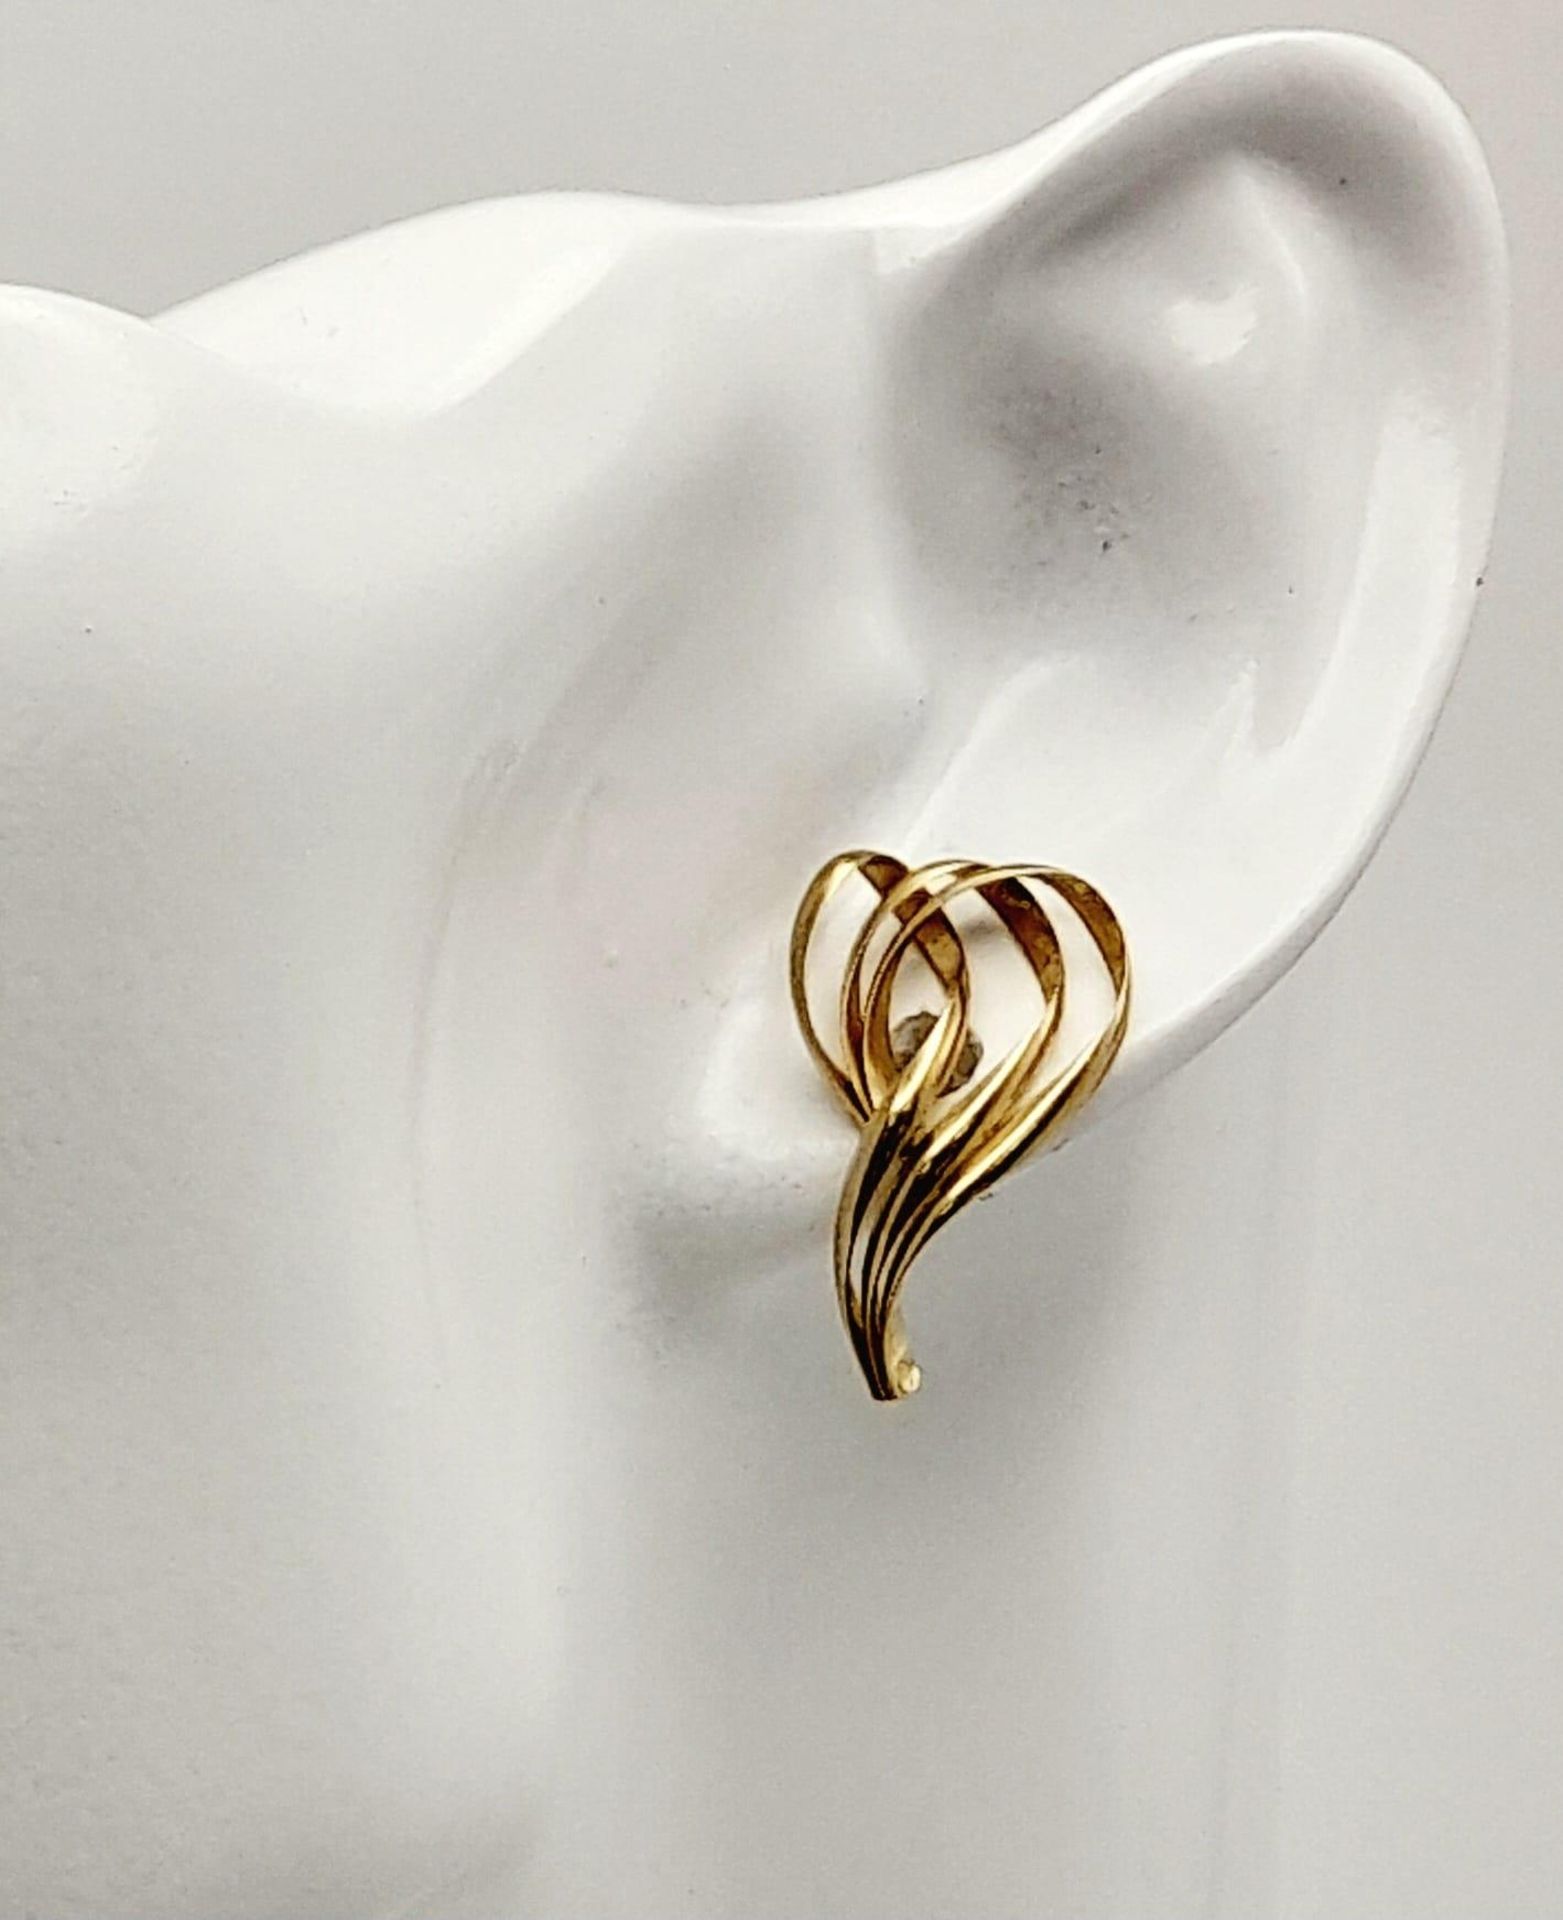 A Pair of 9K Yellow Gold Swirl Earrings. 2.55g total weight. - Image 4 of 11